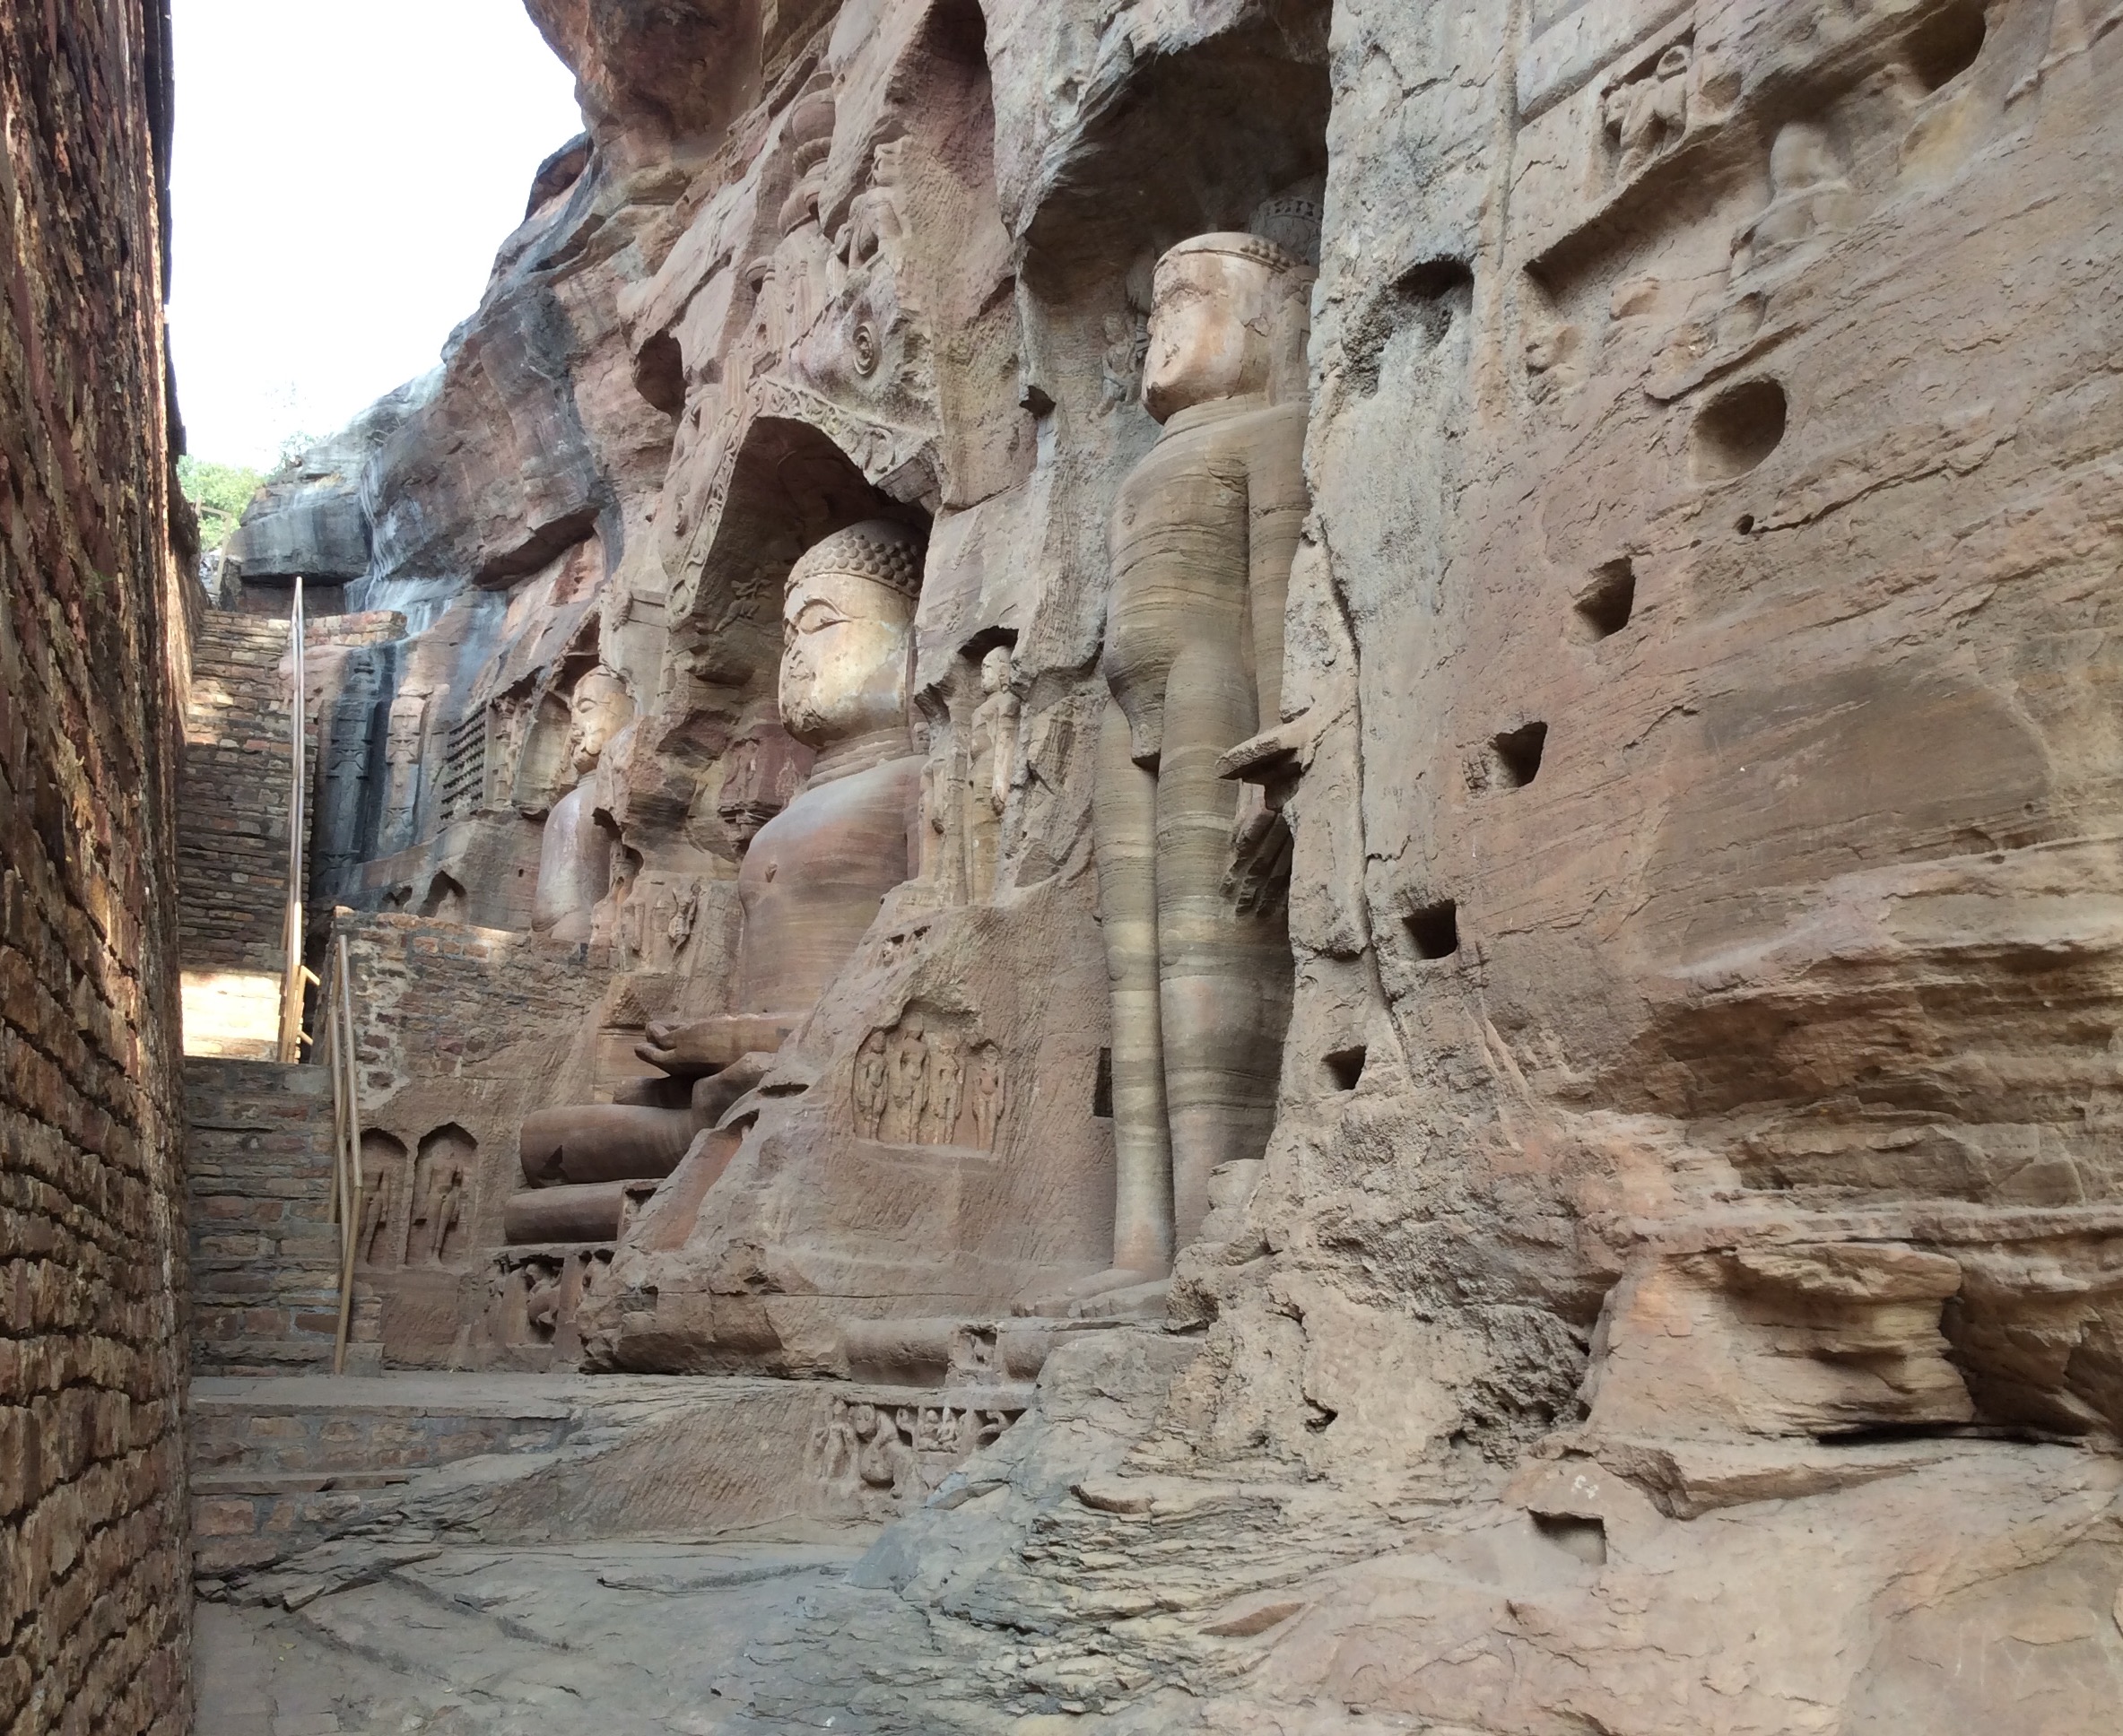 jain statues at siddhachal caves